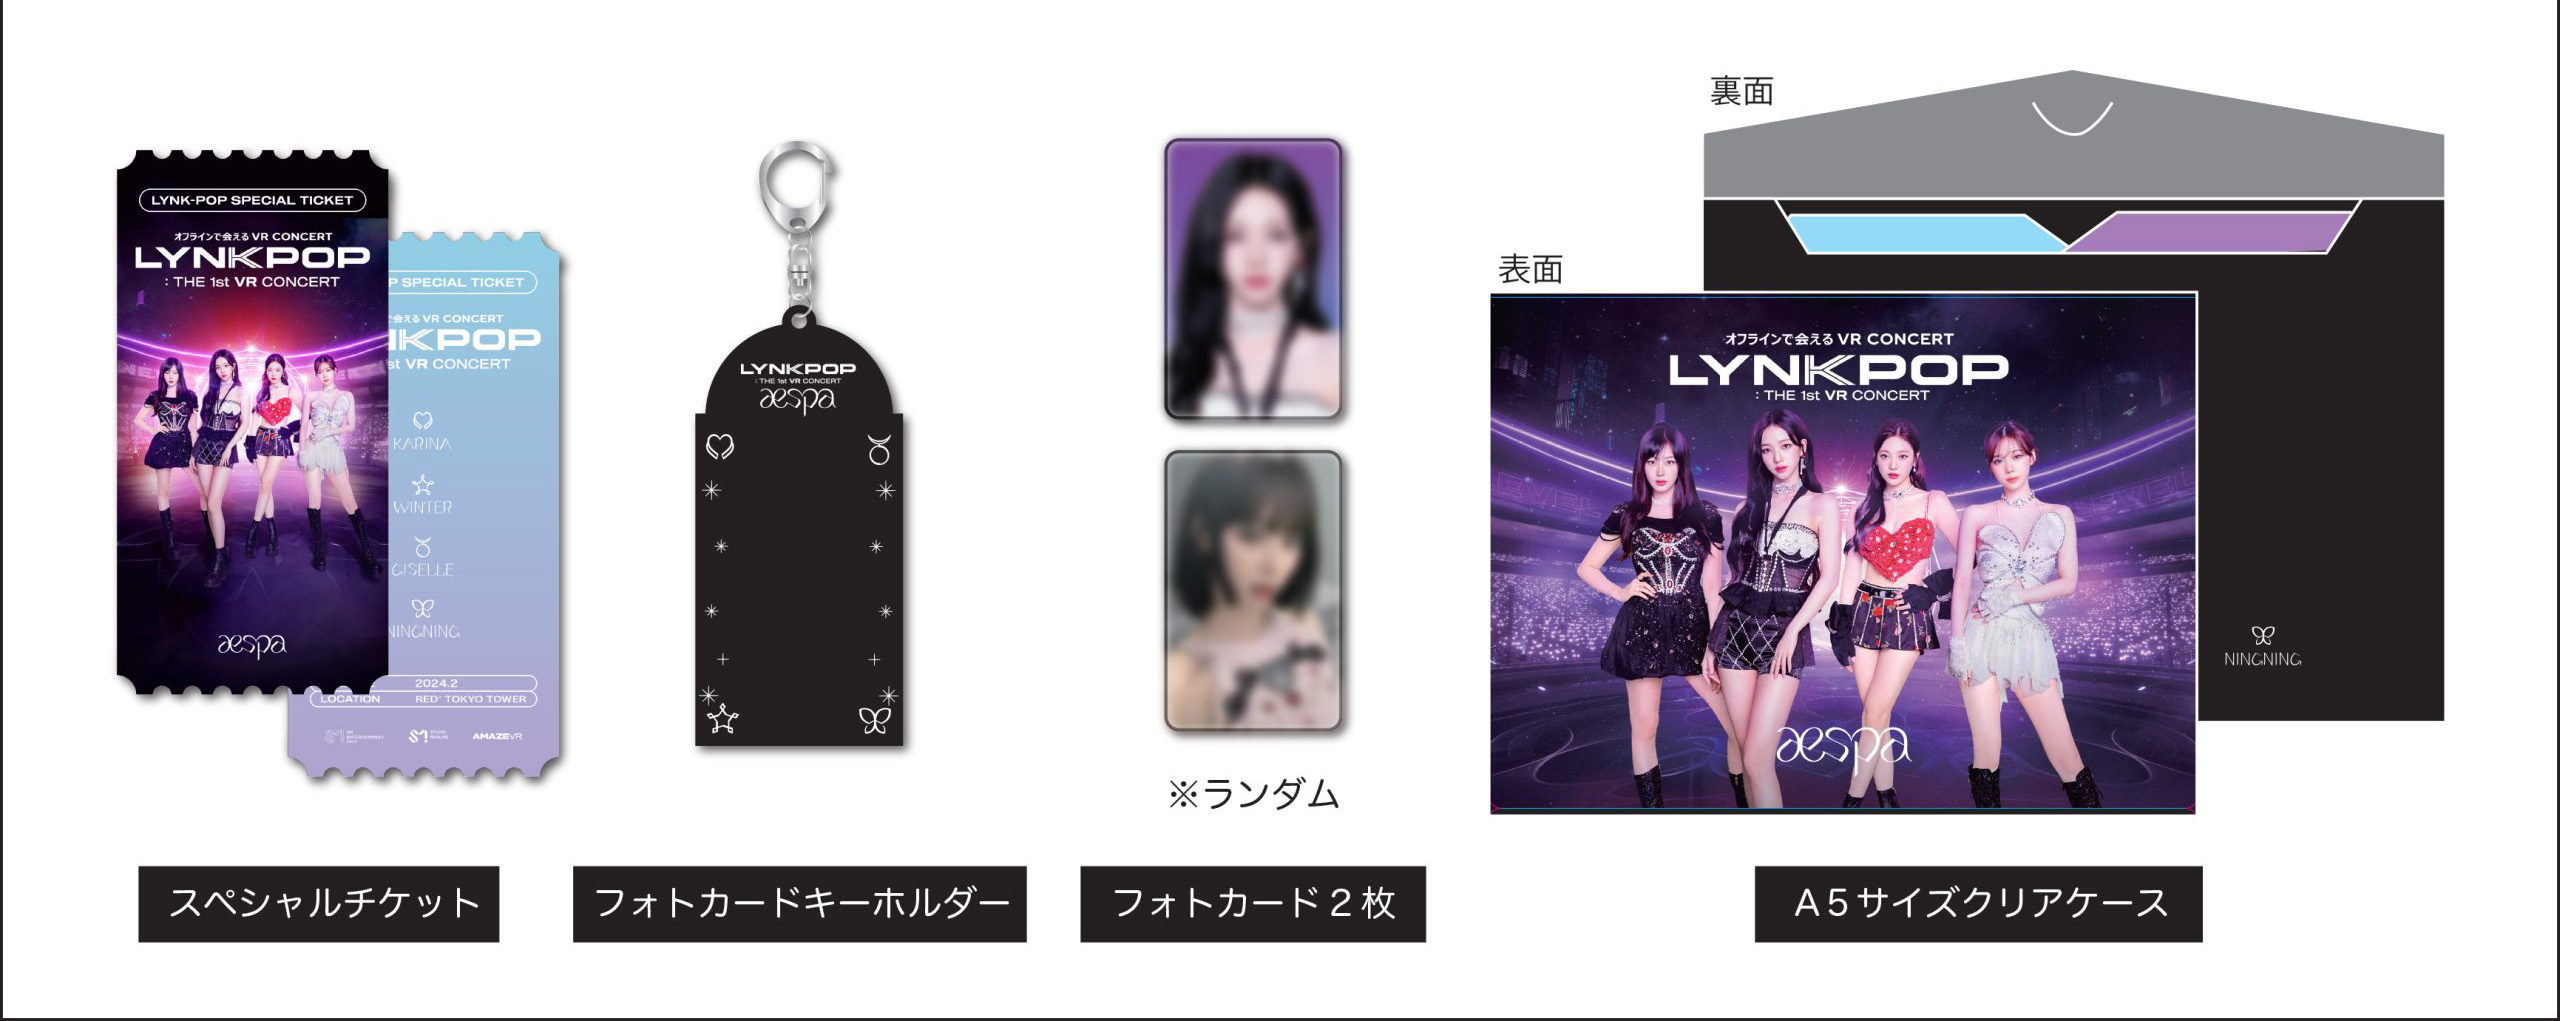 LYNK-POP : THE 1st VR CONCERT aespa | RED° TOKYO TOWER OFFICIAL 